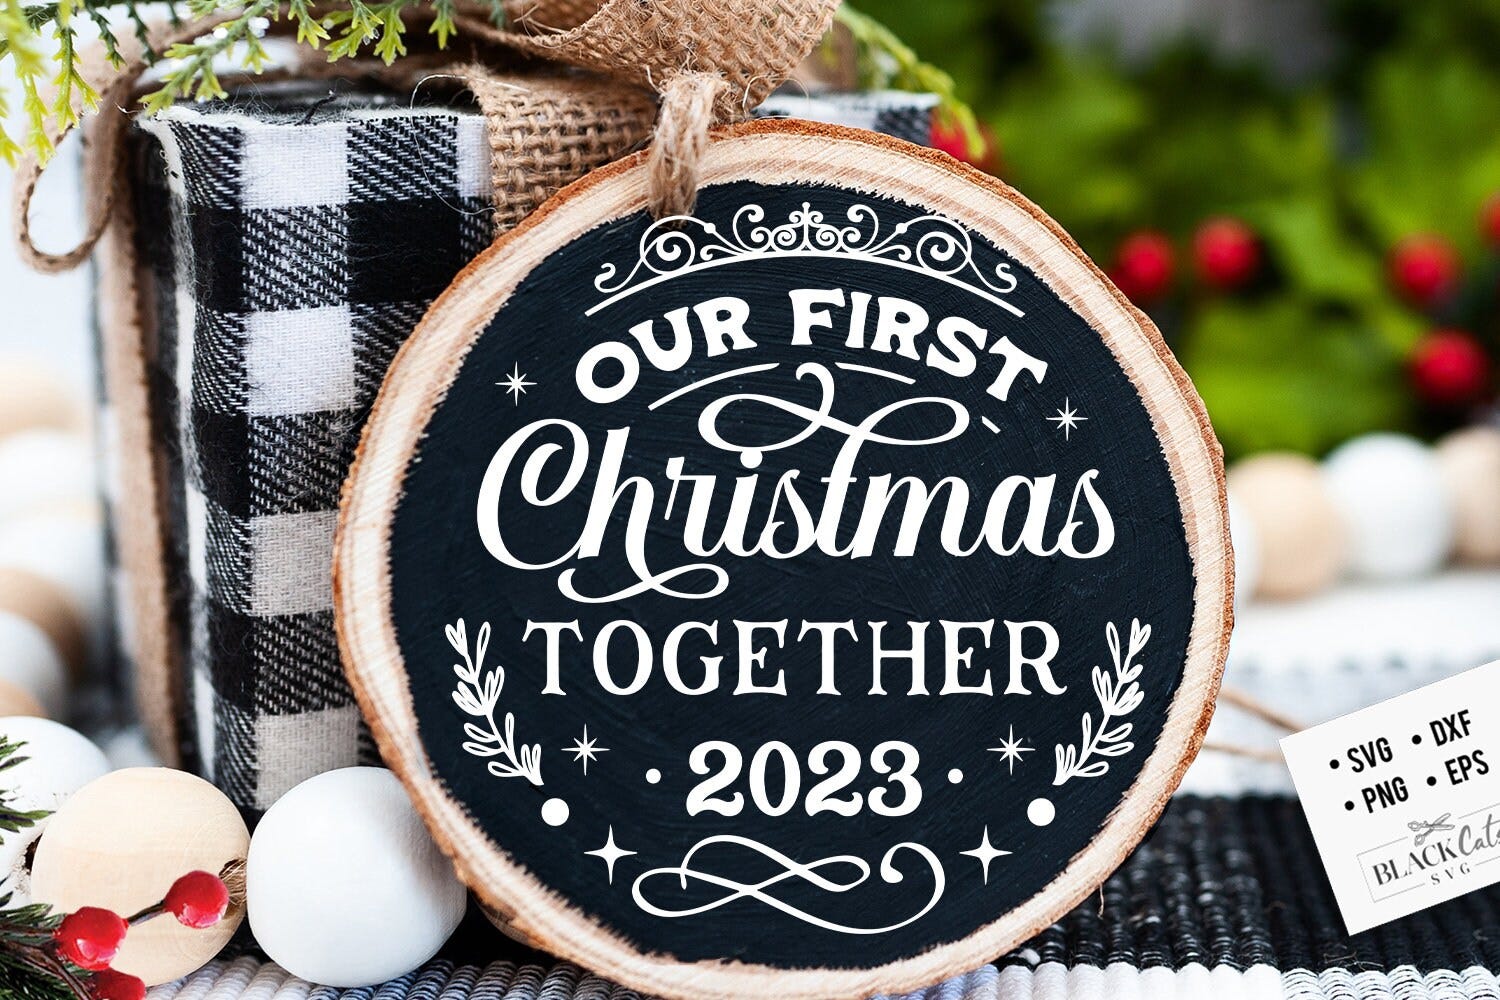 Our First Christmas 2023 svg, First Christmas ornament svg, Our first Christmas svg, First Christmas round ornament svg, Together Christmas